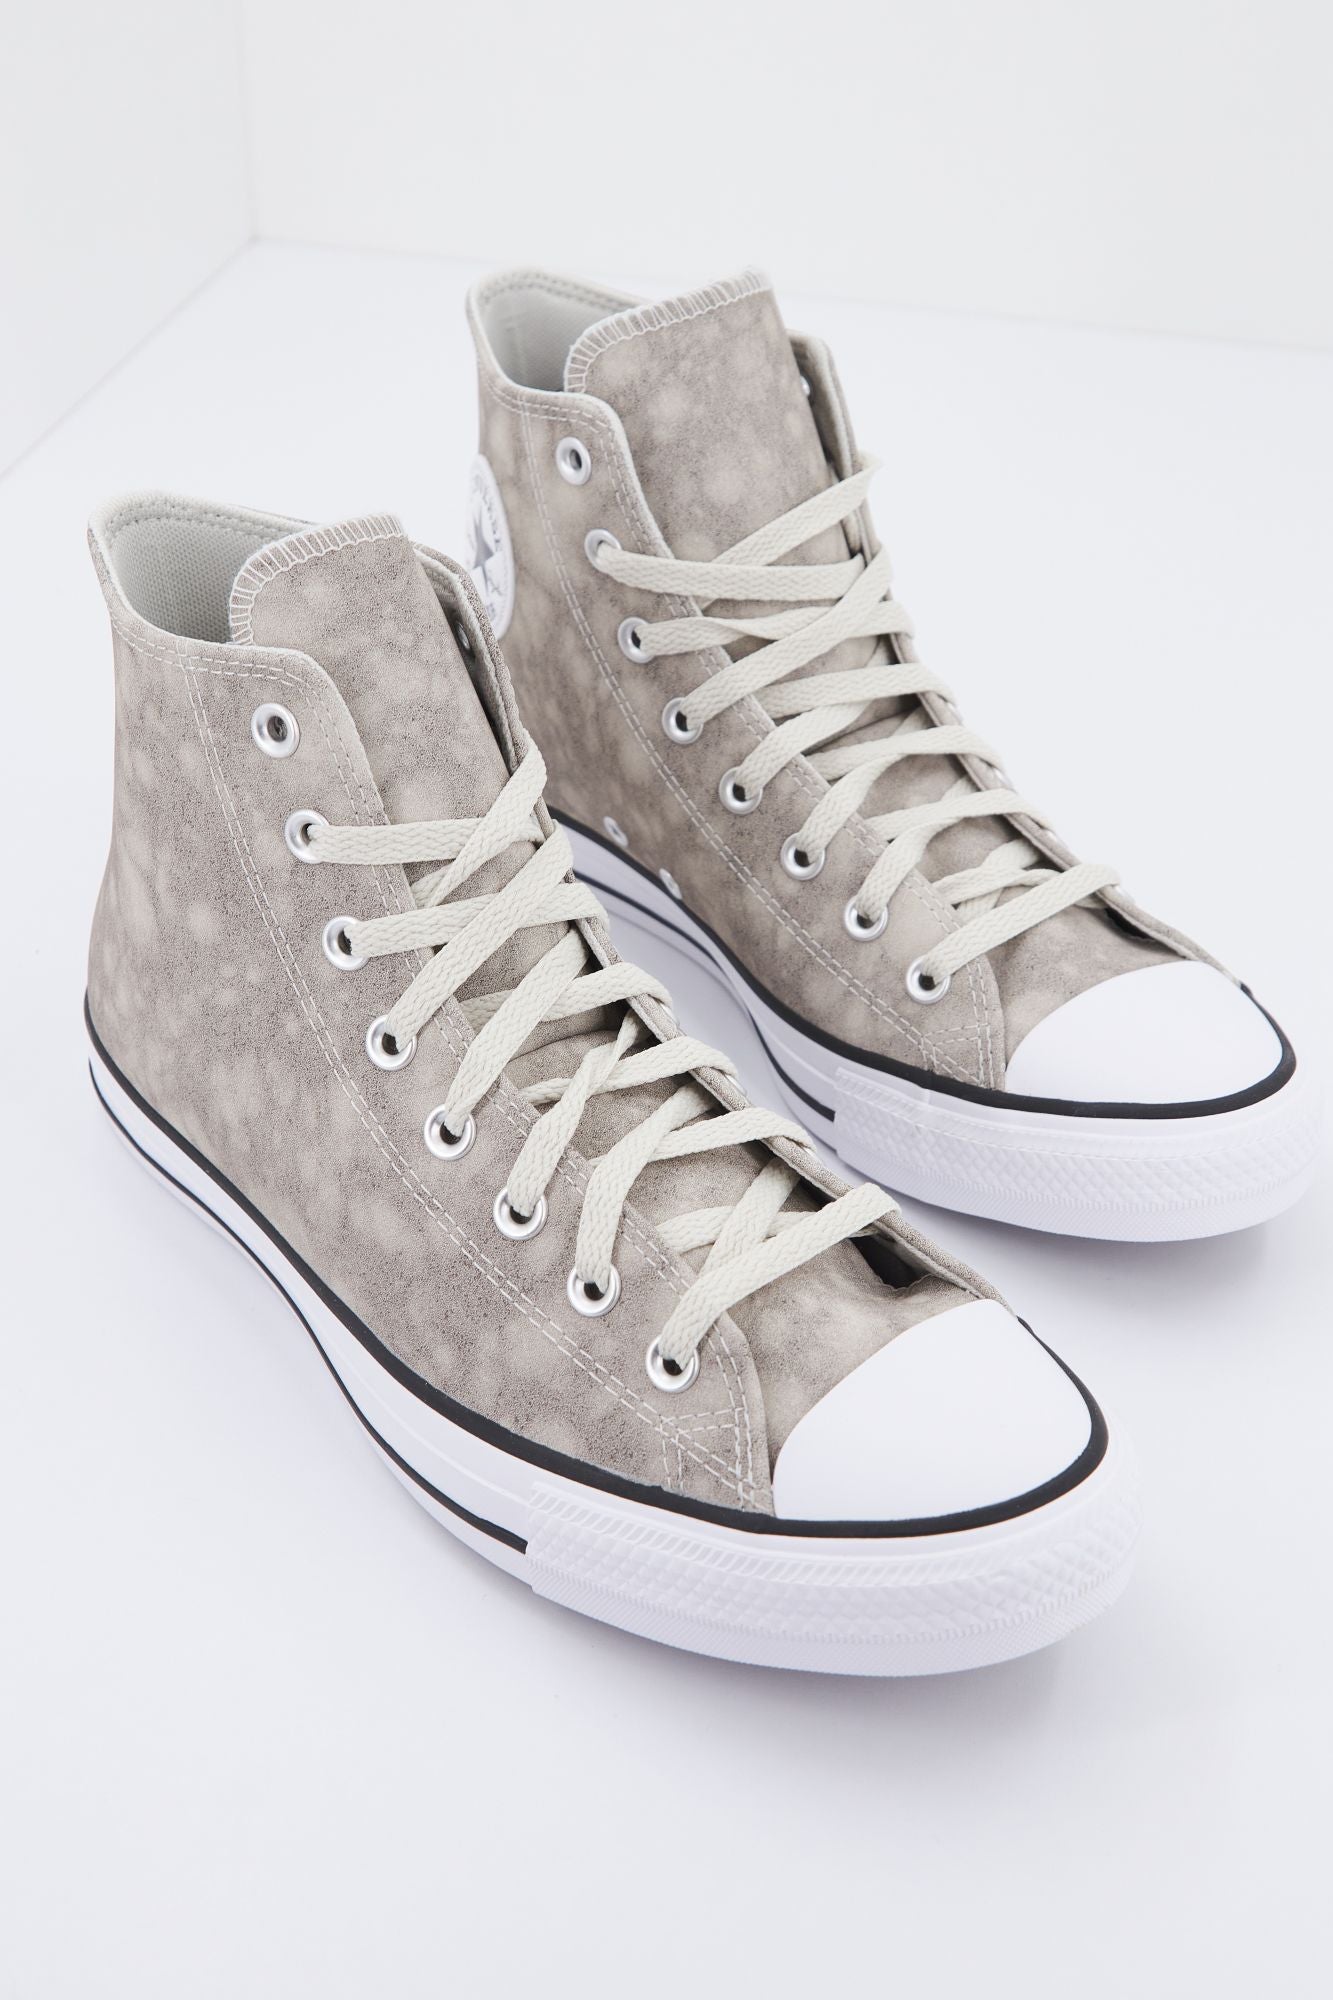 CONVERSE CHUCK TAYLOR ALL STAR DISTRESSED en color BEIS (4)